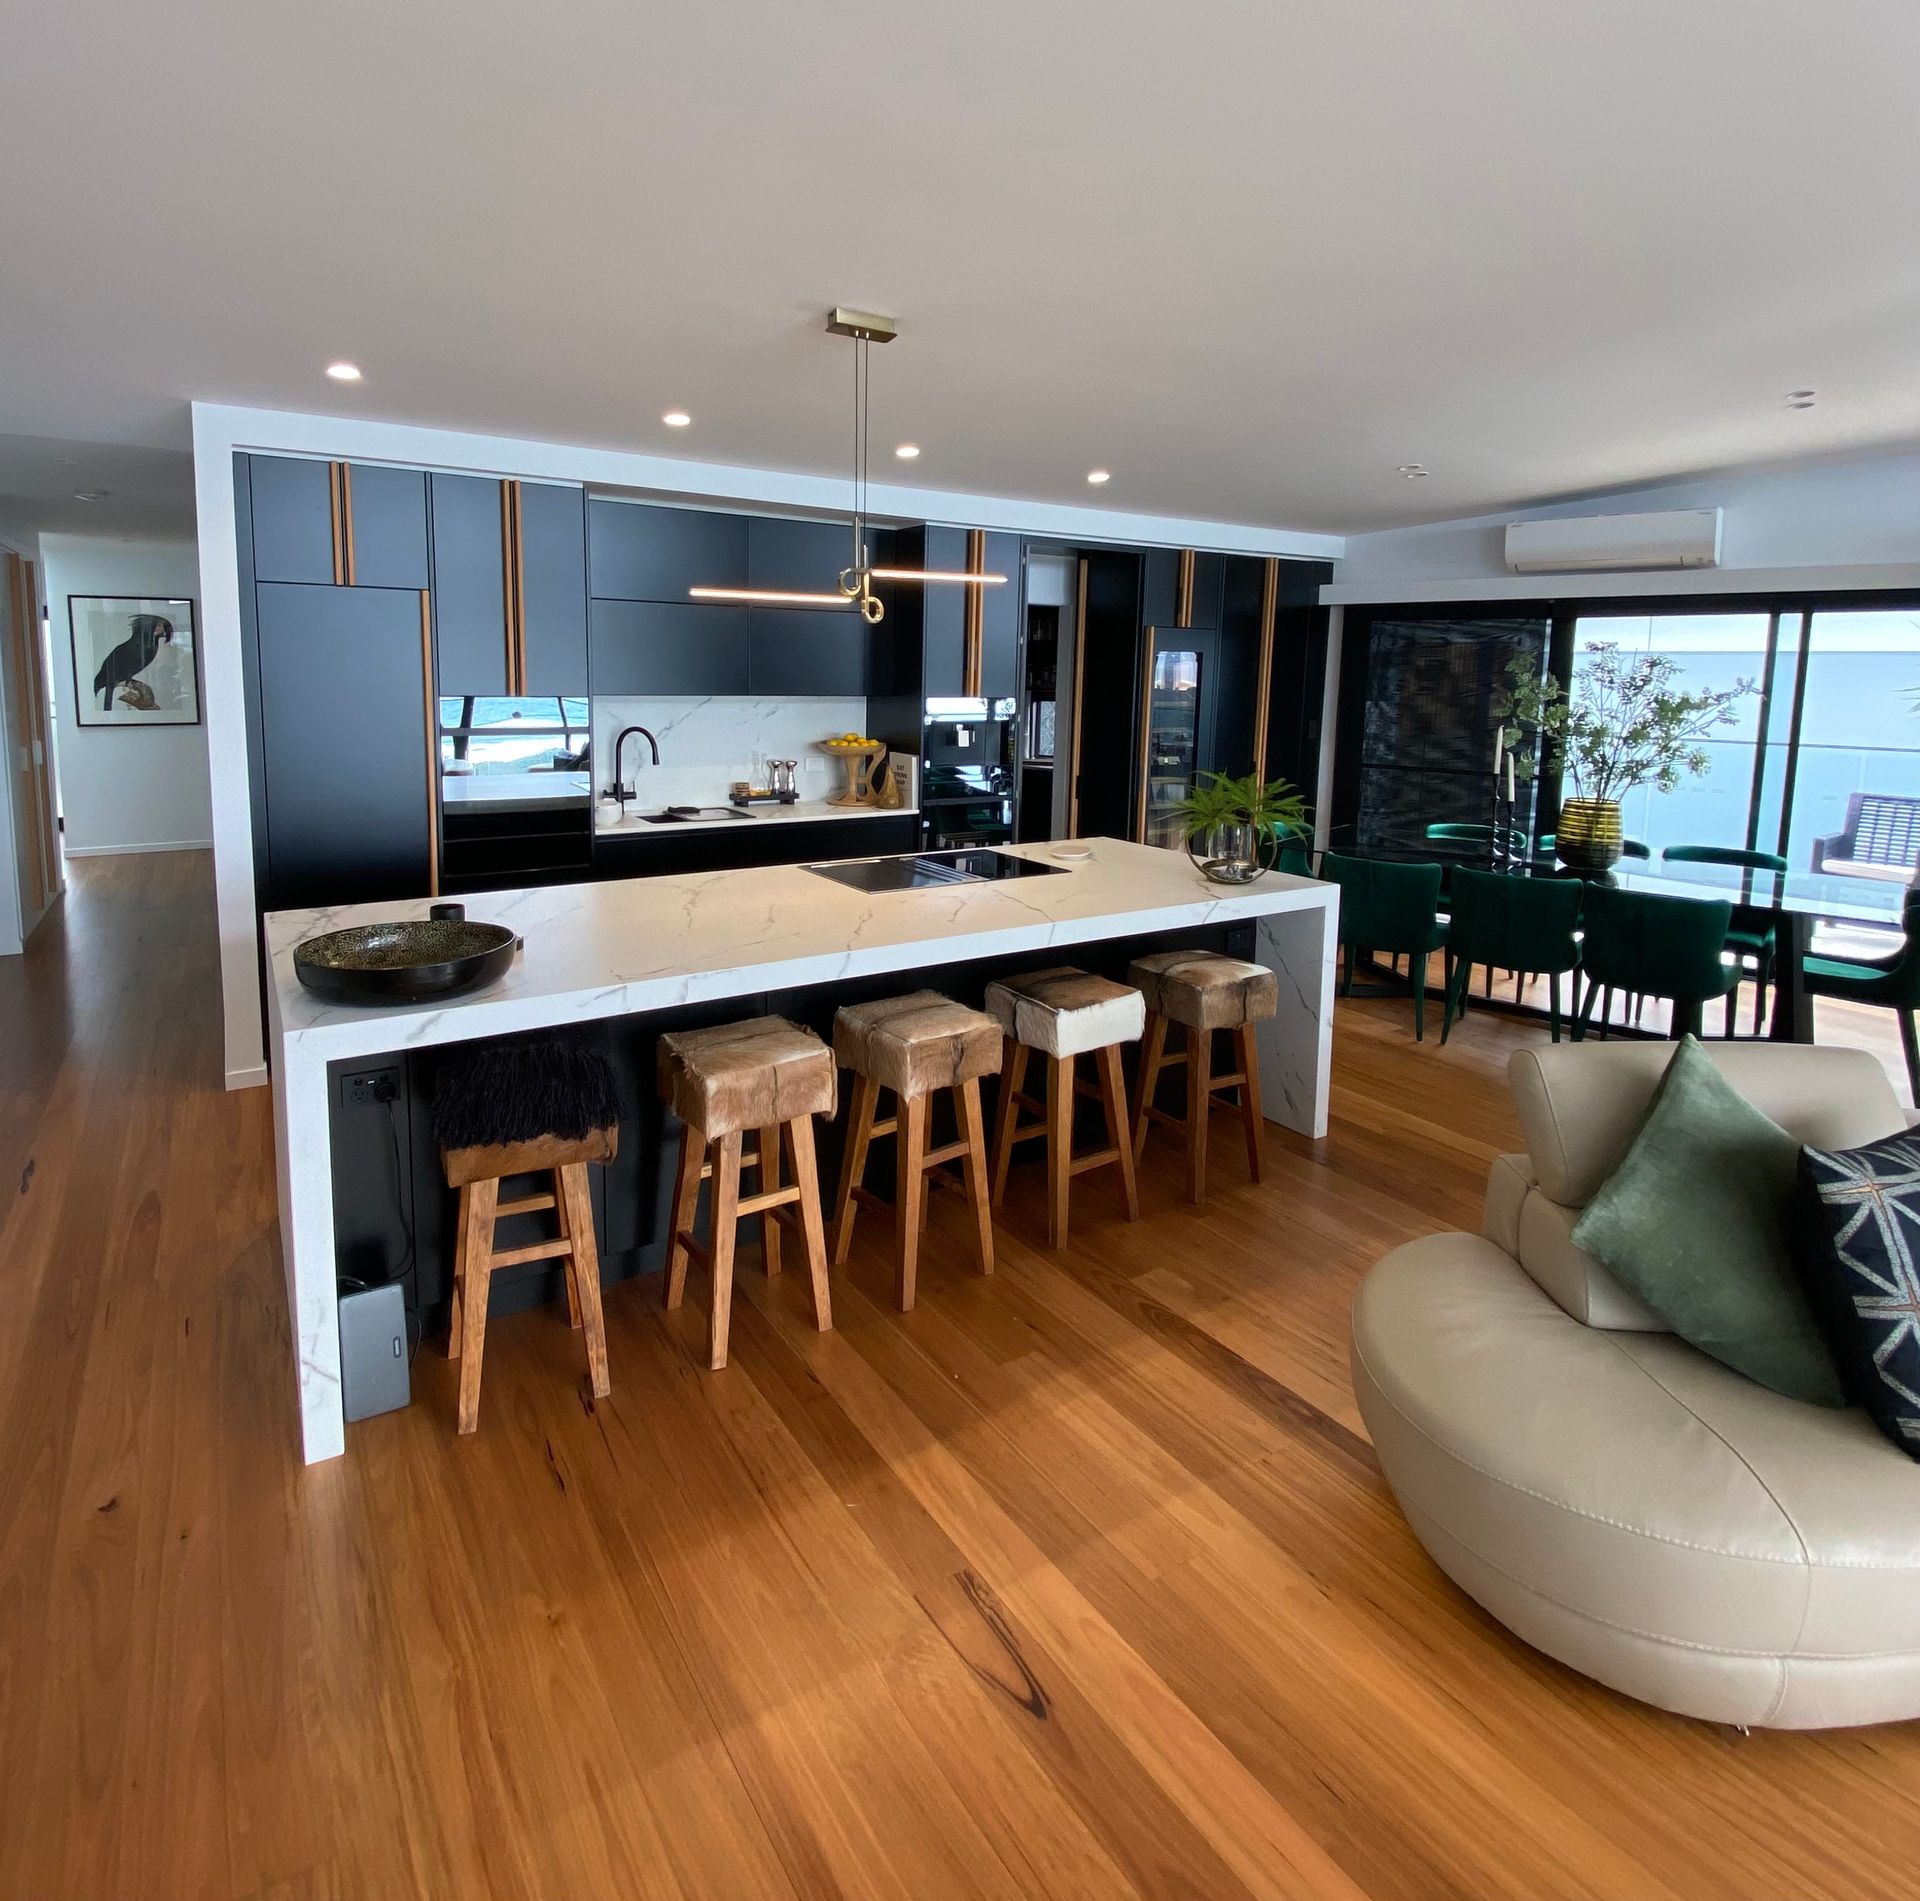 Wood Fire Place And Shelving Design - Renovation Specialist in Forster, NSW